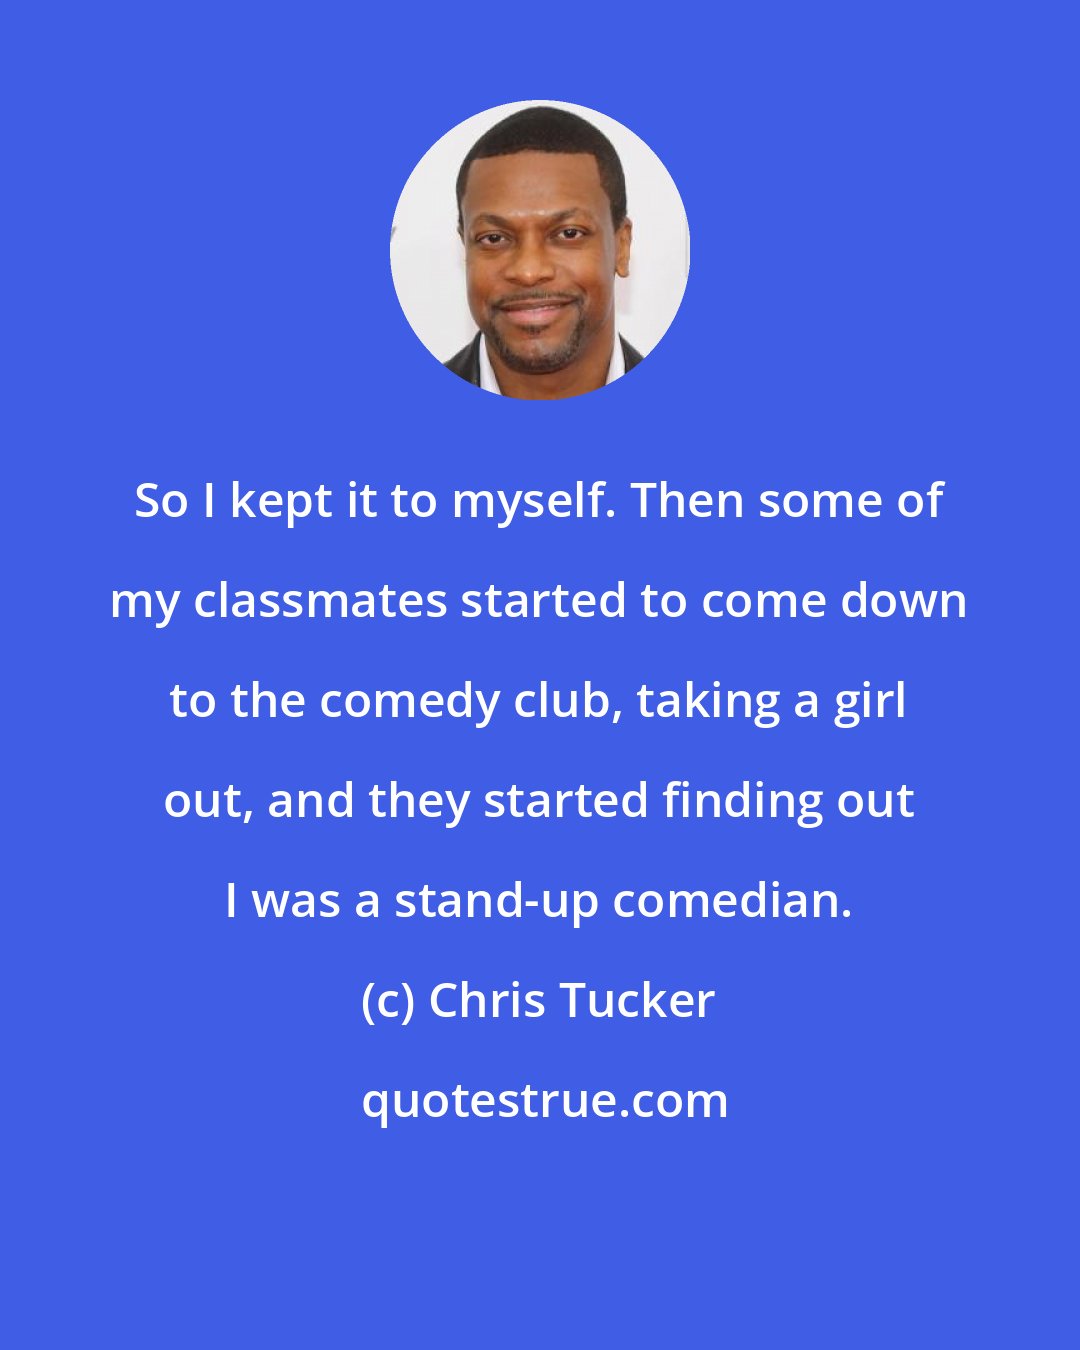 Chris Tucker: So I kept it to myself. Then some of my classmates started to come down to the comedy club, taking a girl out, and they started finding out I was a stand-up comedian.